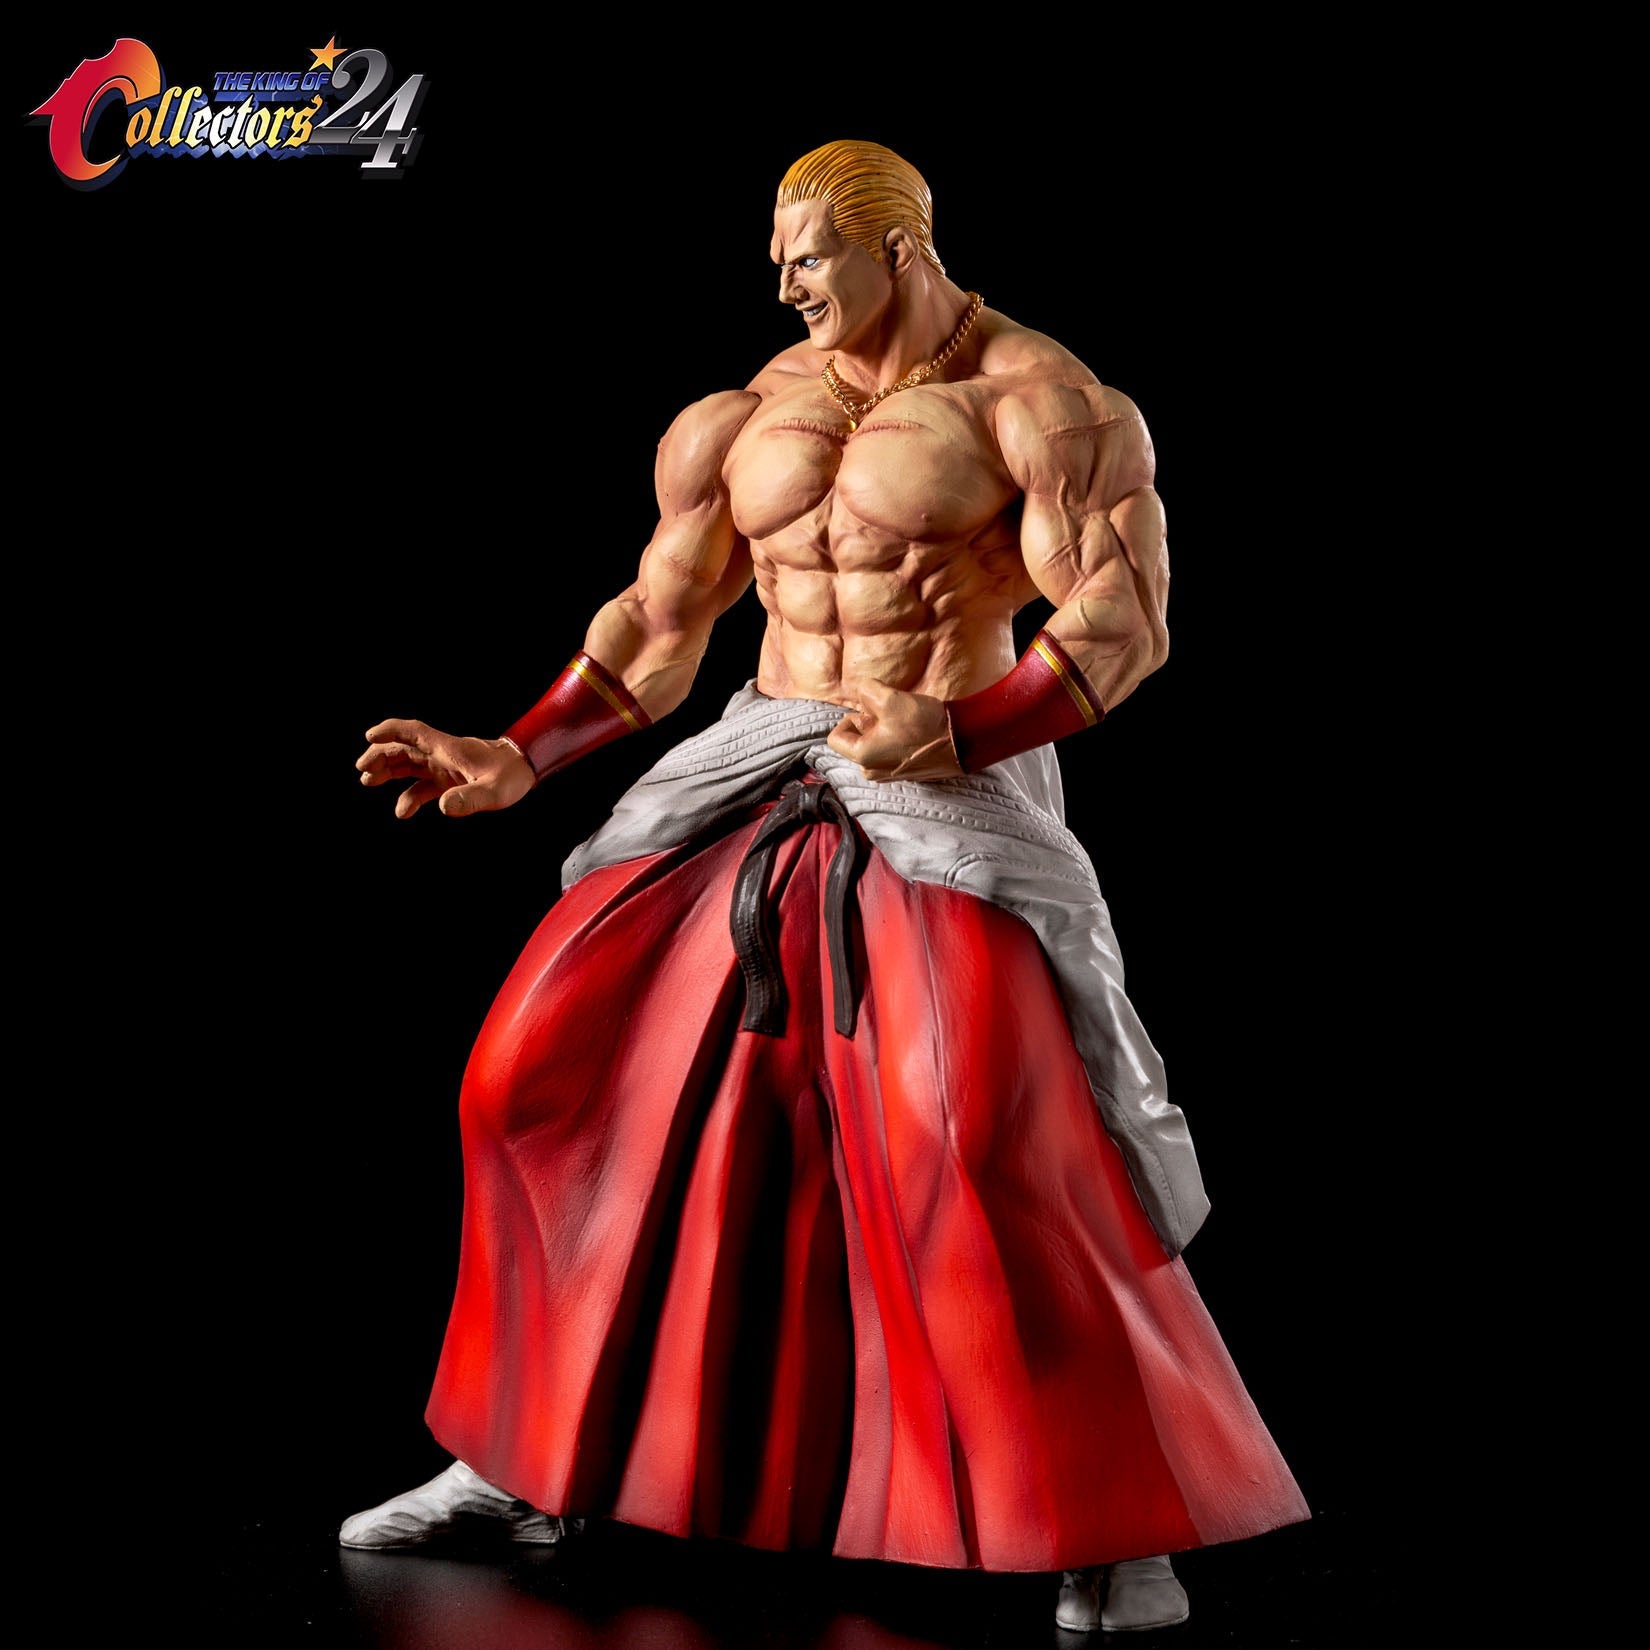 THE KING OF COLLECTORS'24 No.2 "Geese Howard" (regular color) | animota